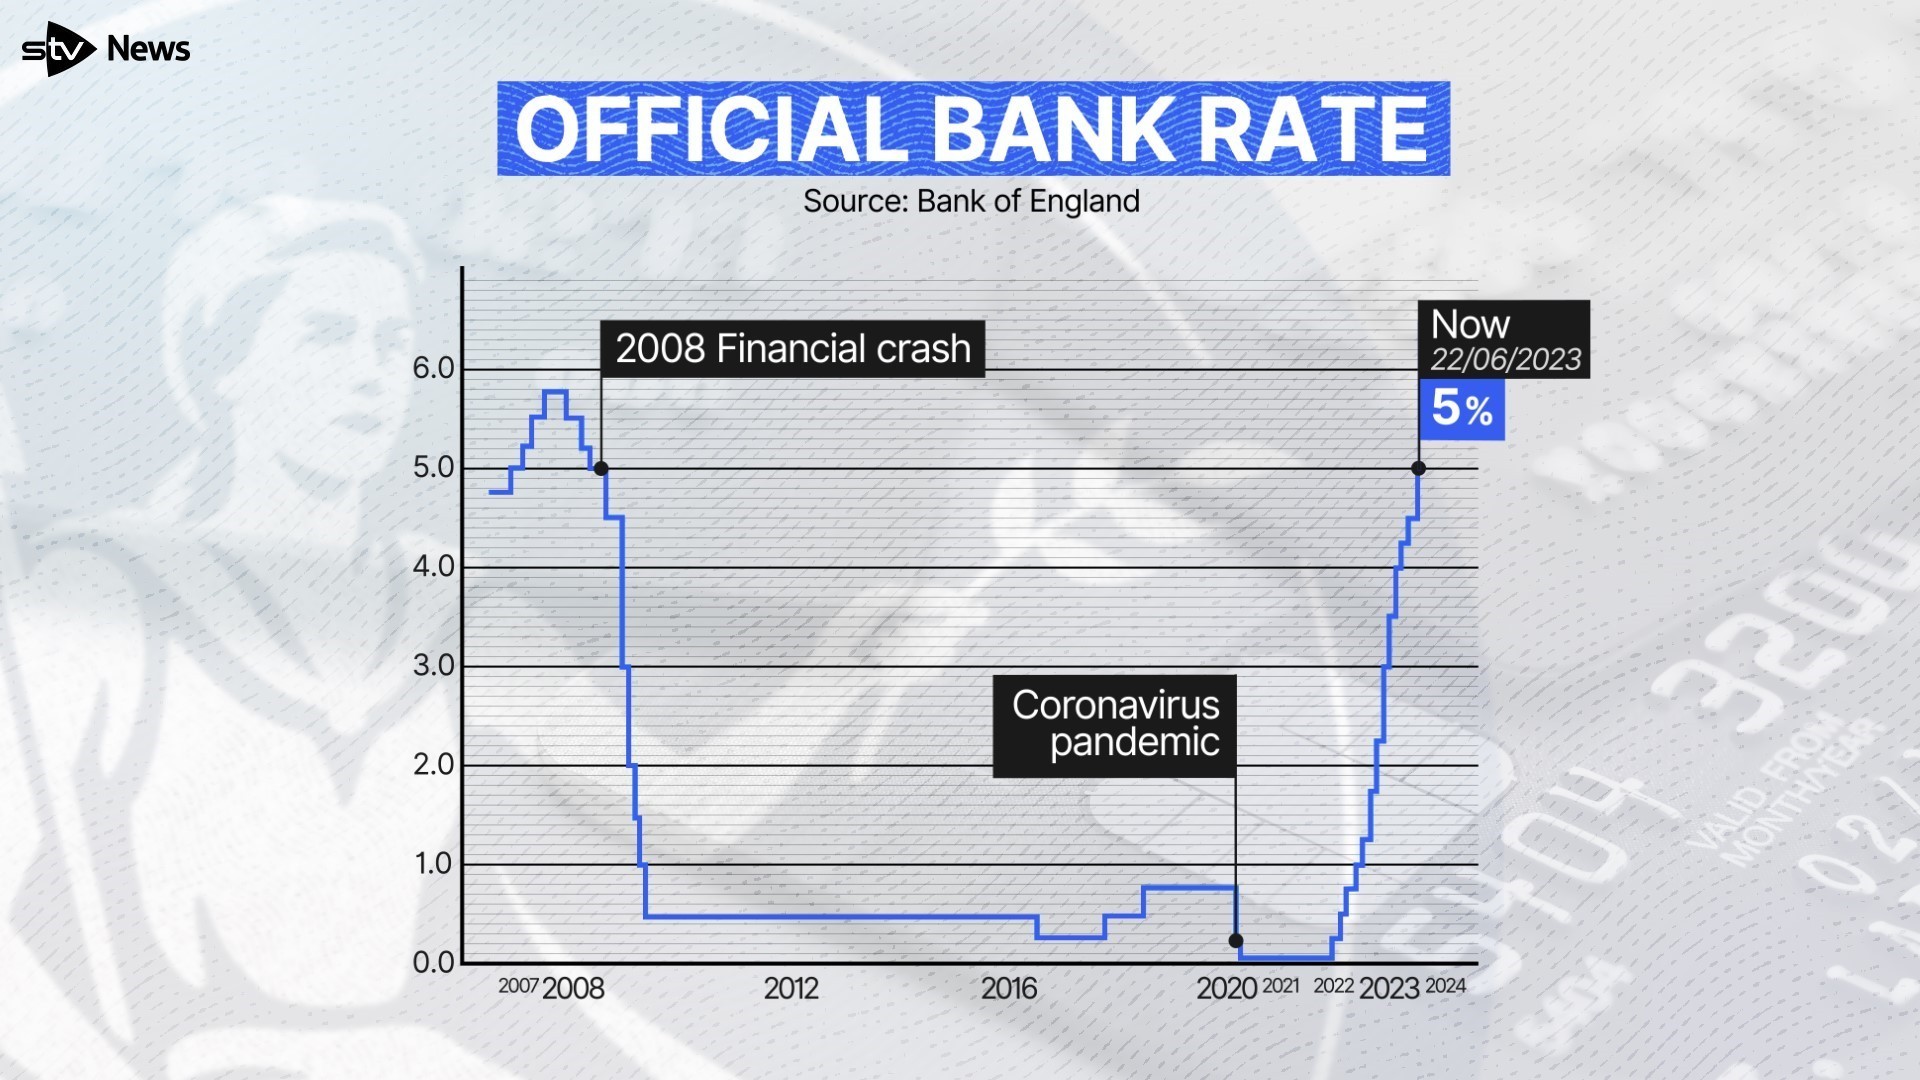 The Bank of England has raised its base interest rate to 5% for record 13th increase in a row.